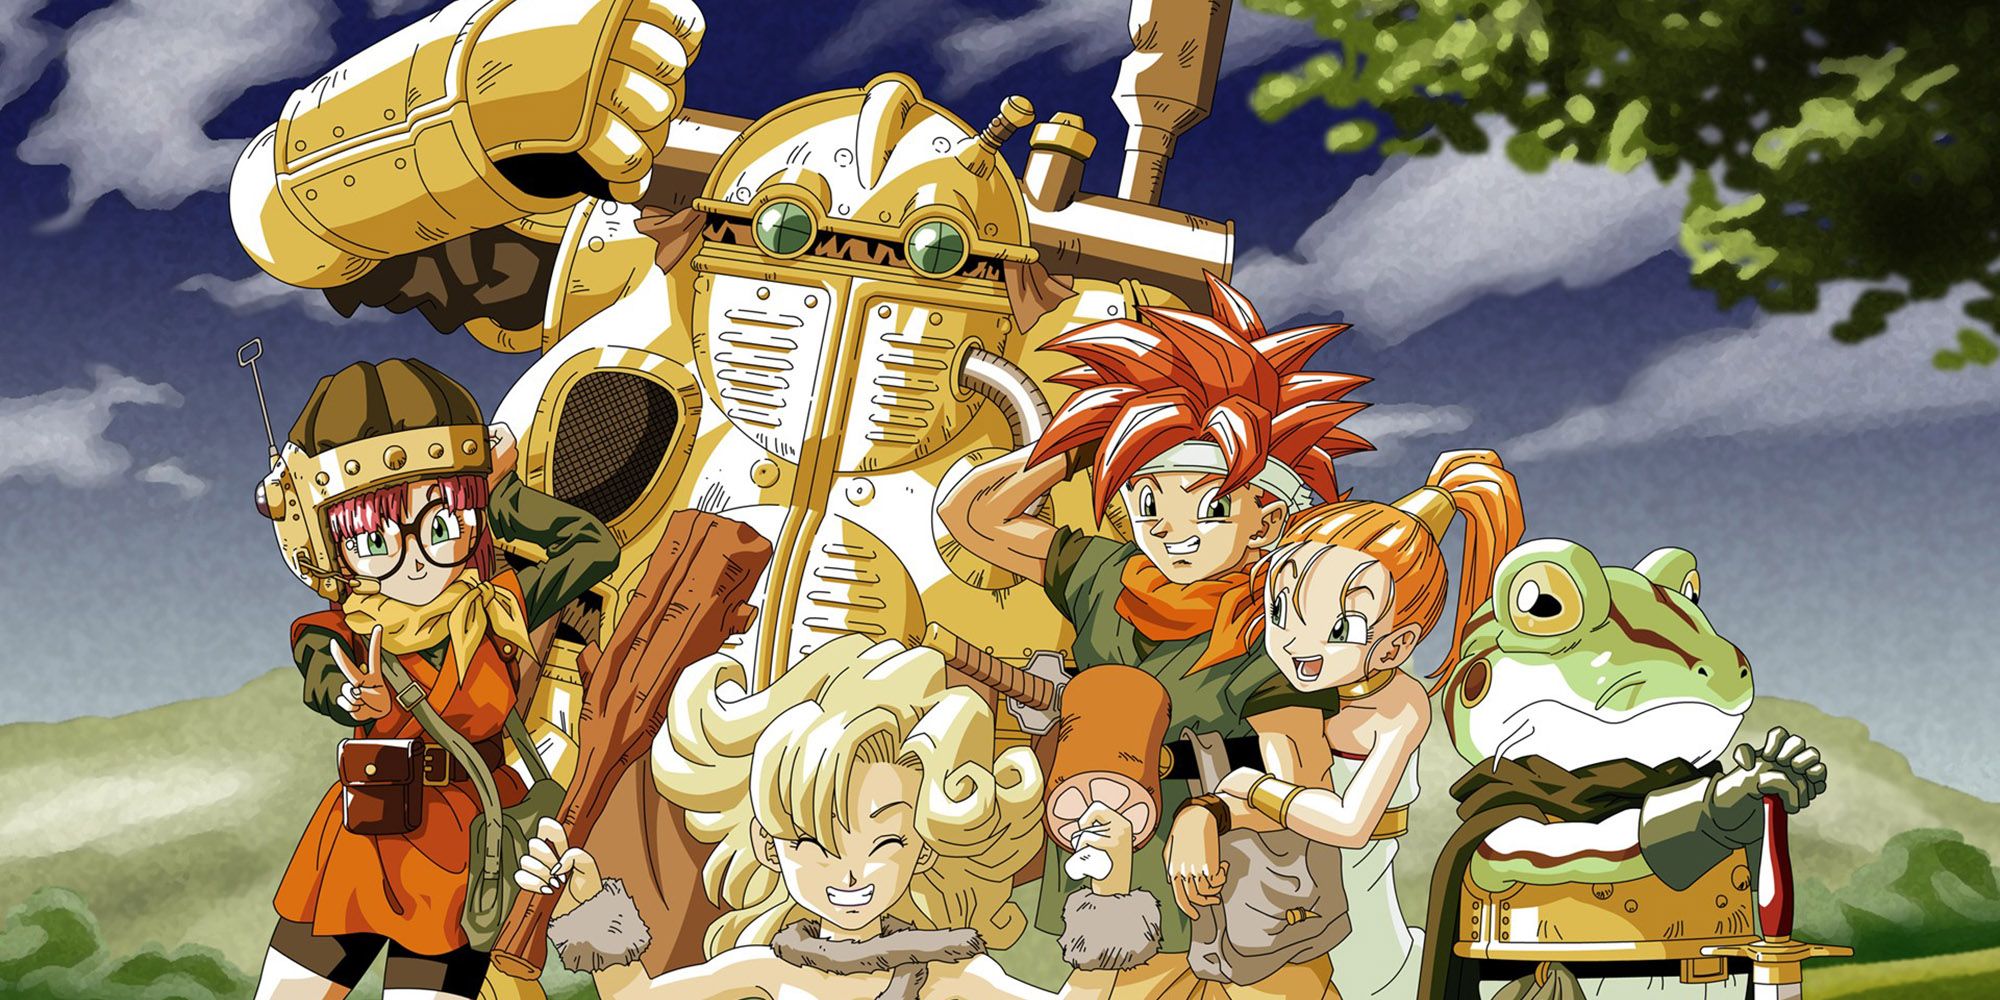 The PlayStation anime portrait from Chrono Trigger